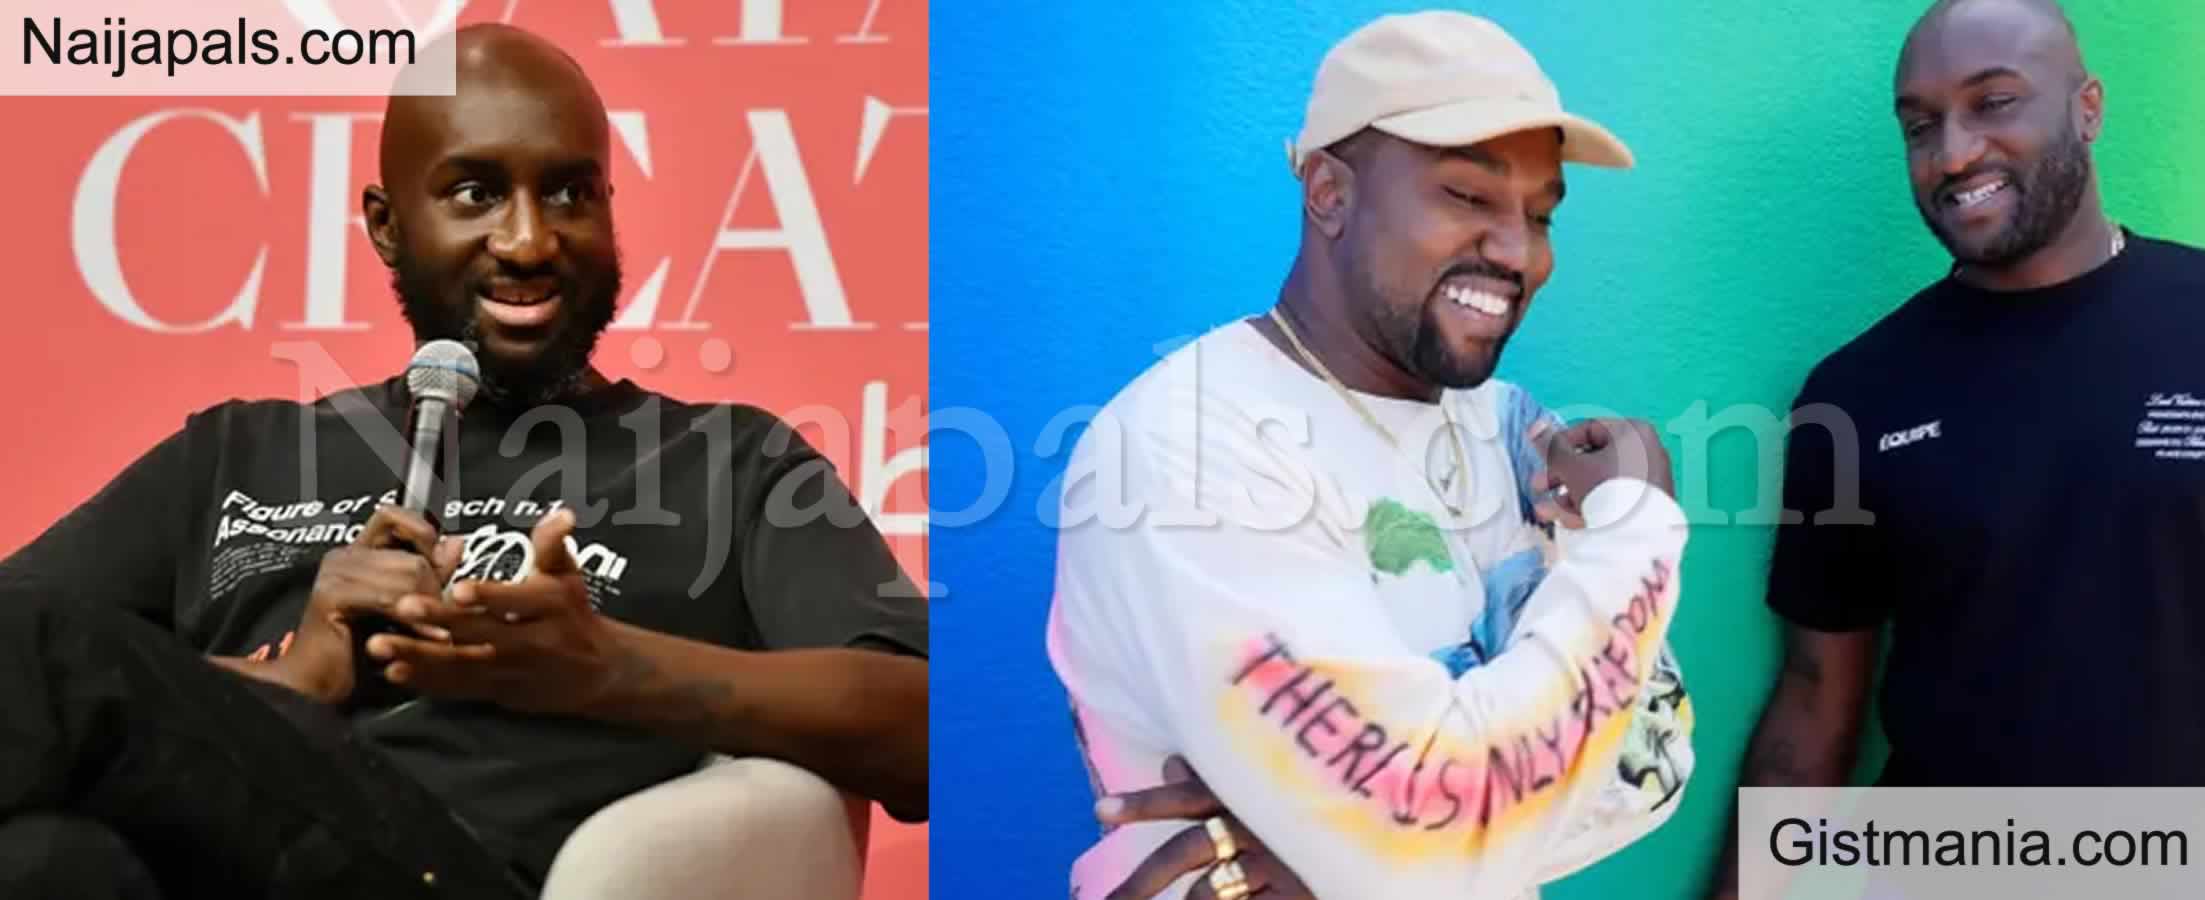 Kanye West's Friend Virgil Abloh Dies From Cancer At 41